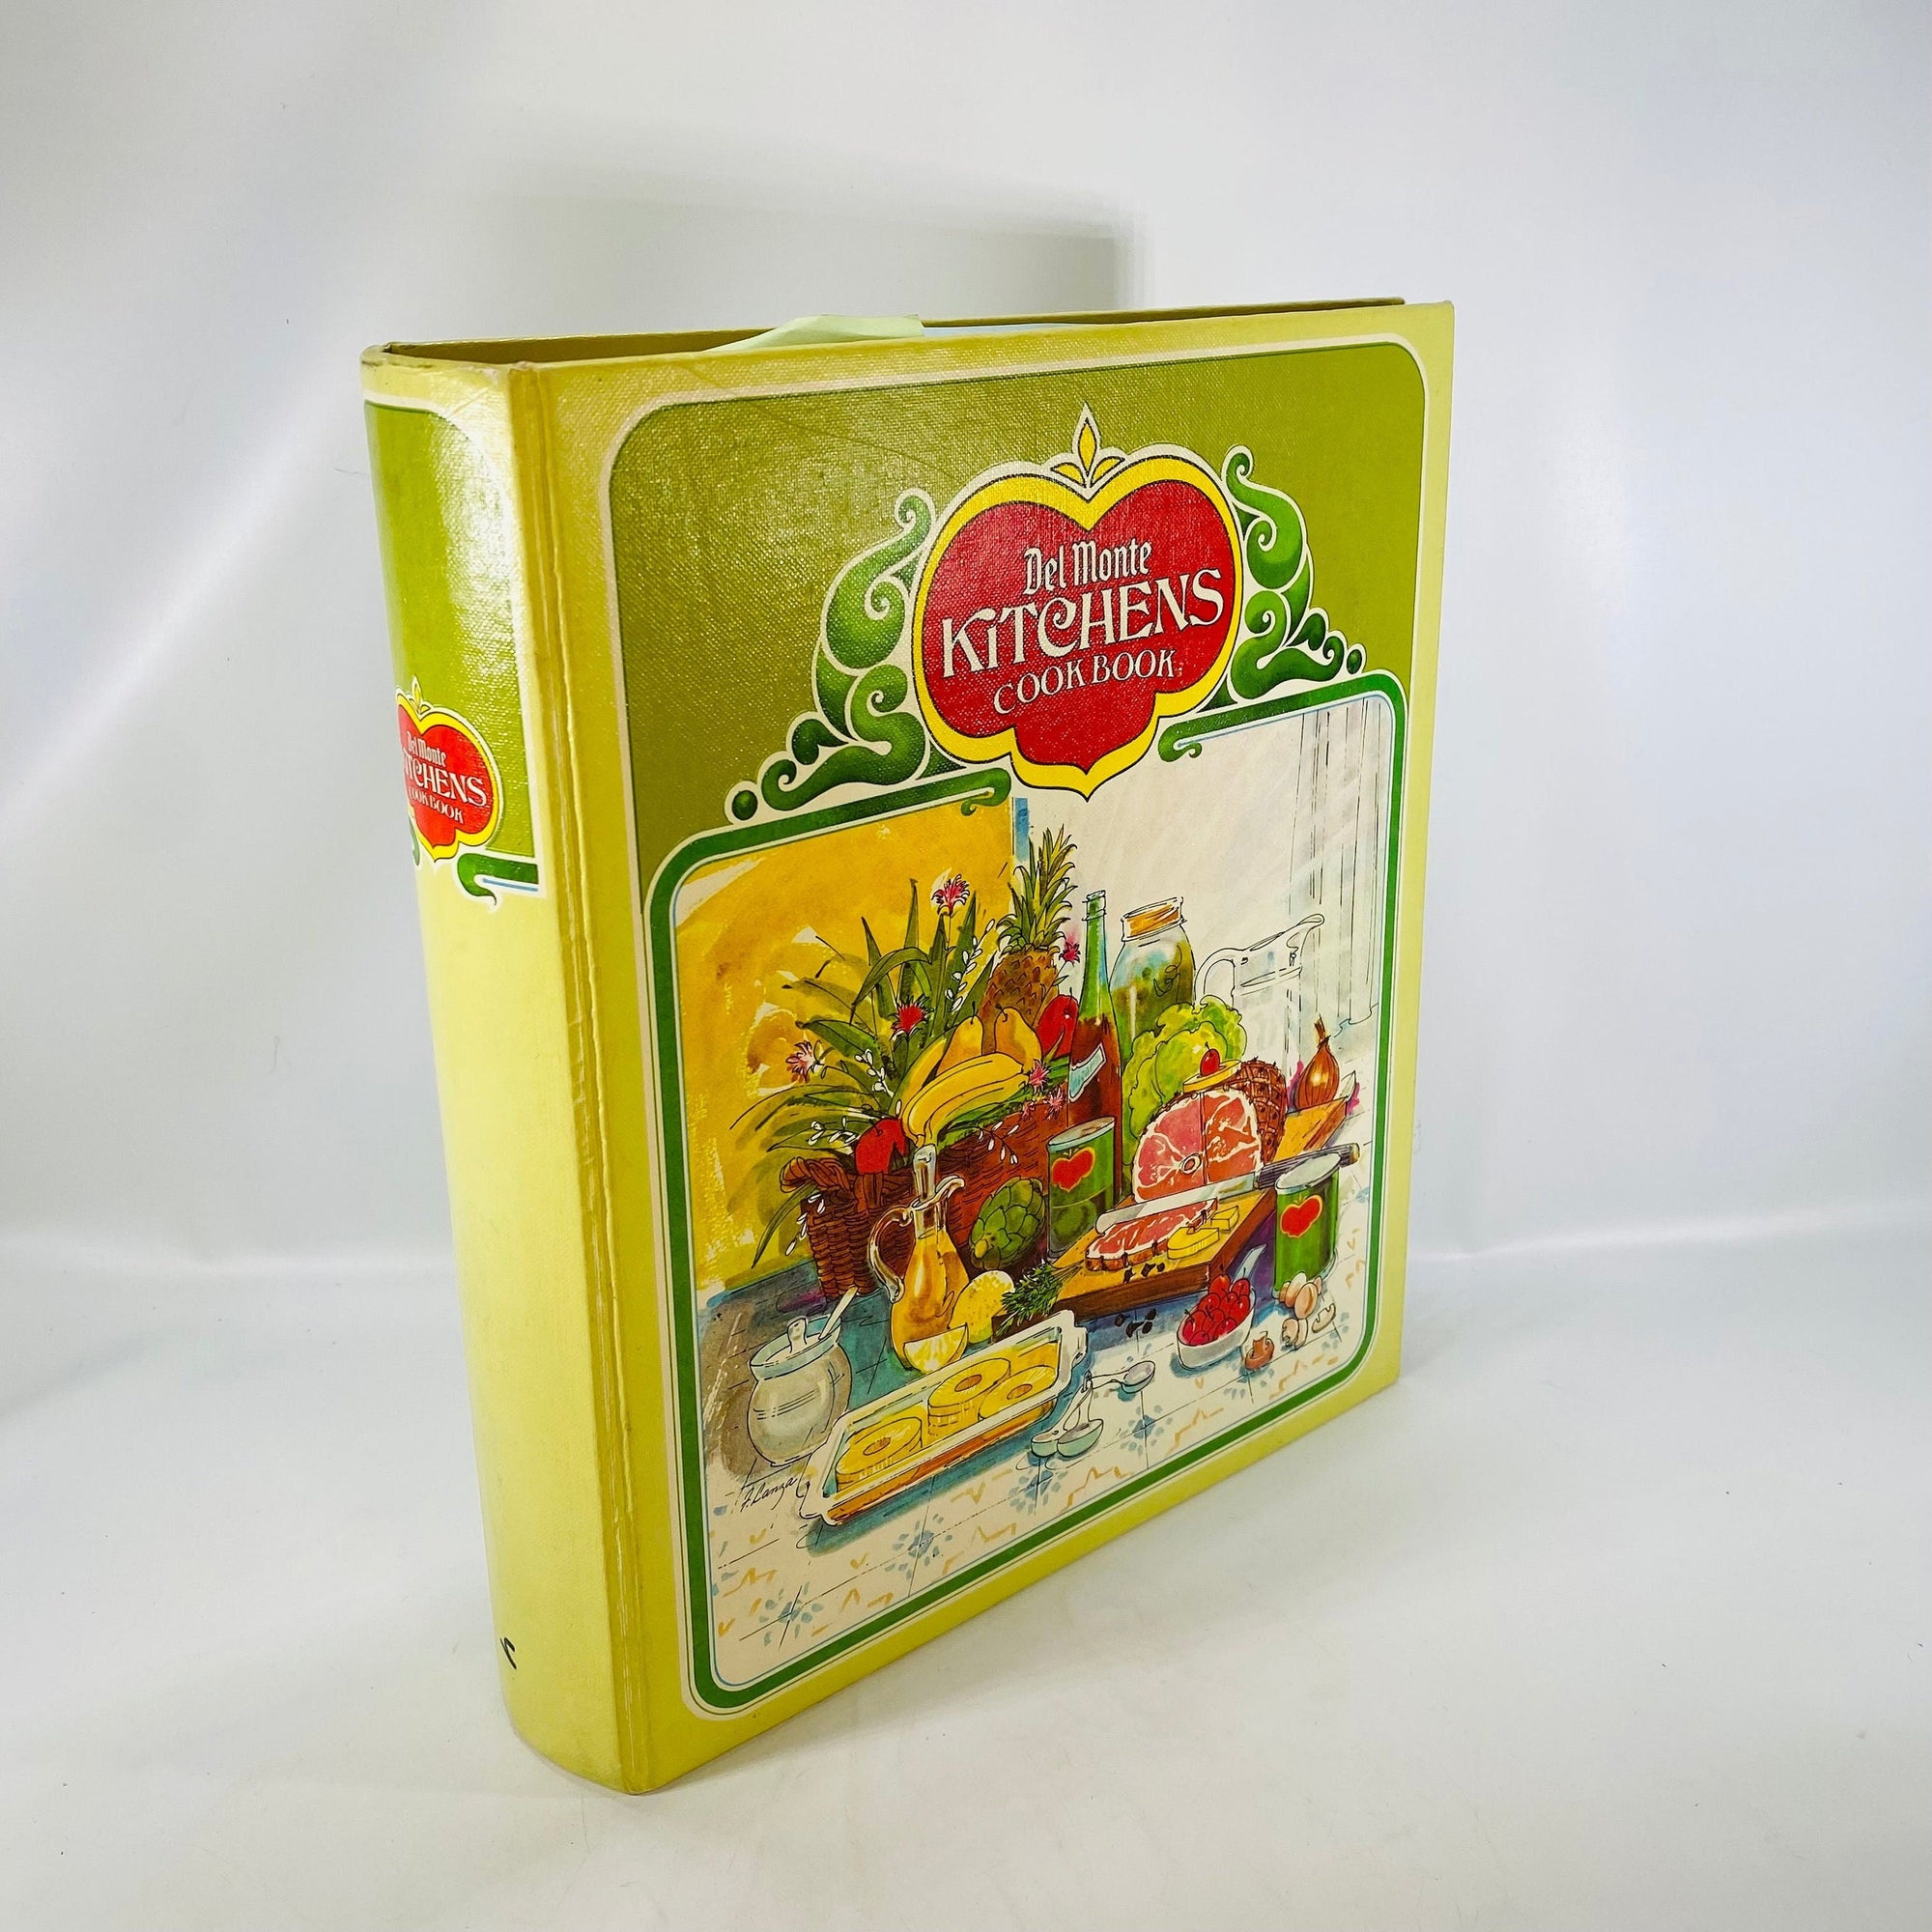 Del Monte Kitchens Cook Book Three Ring Binder Found with Recipes 1970s Vintage Book with Recipes